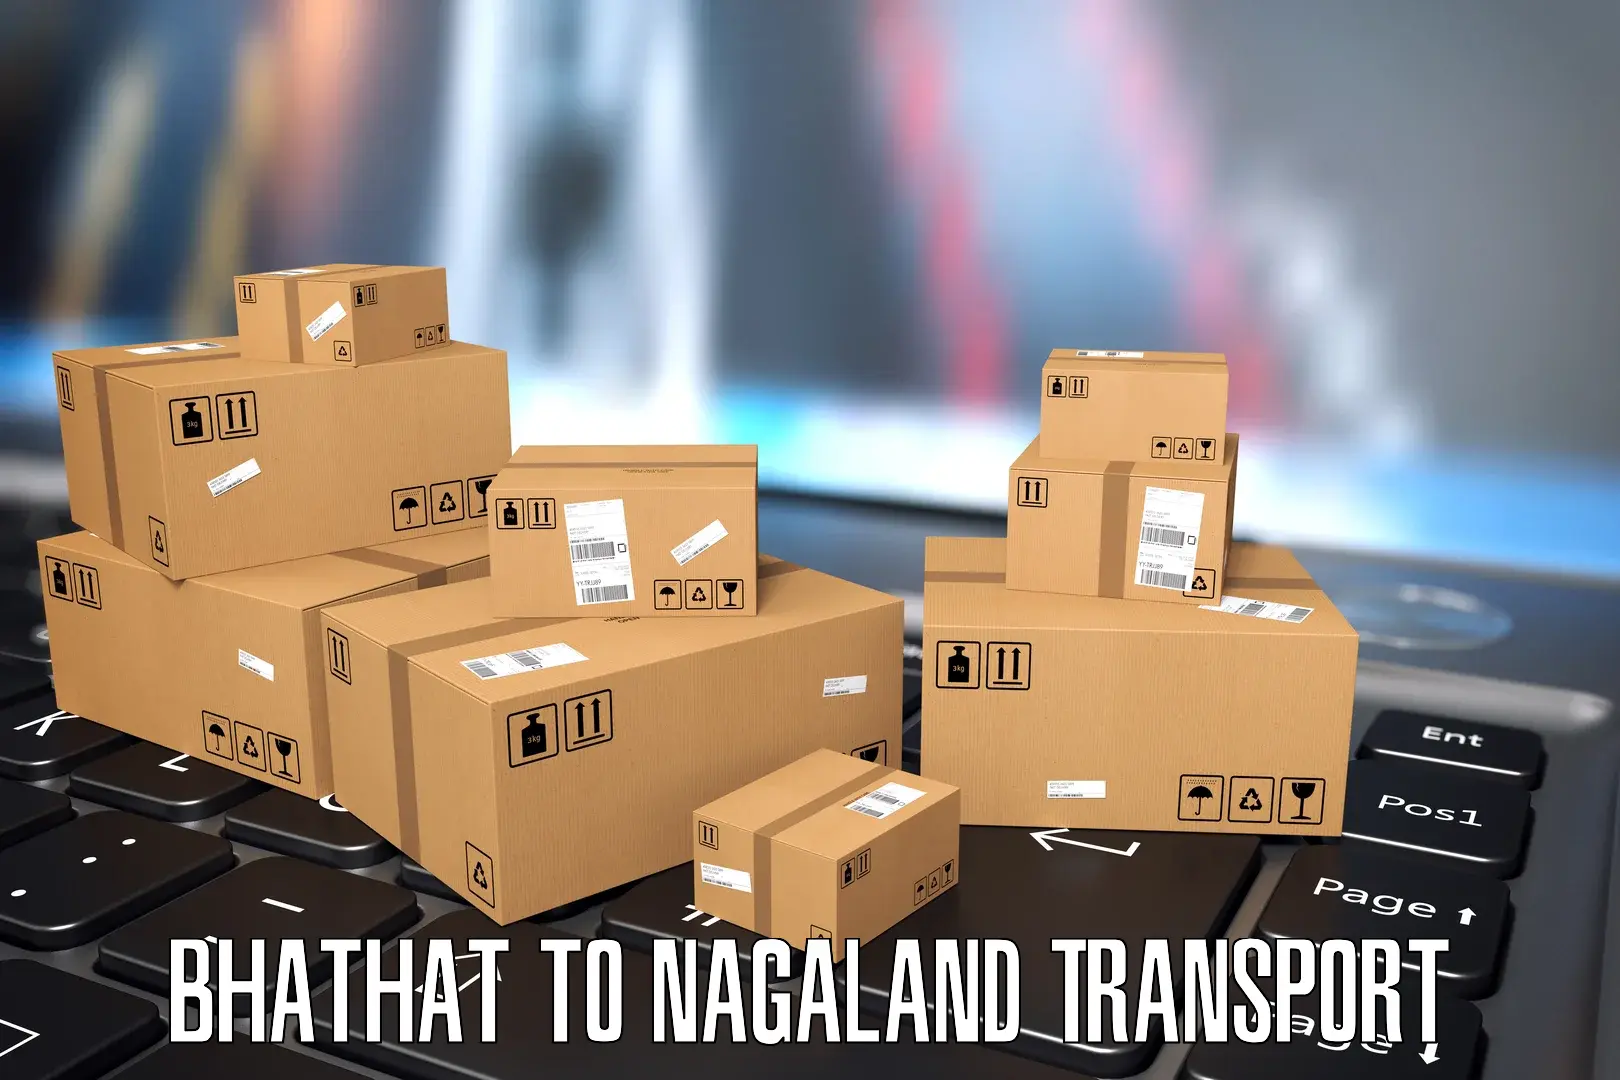 Two wheeler transport services Bhathat to Nagaland